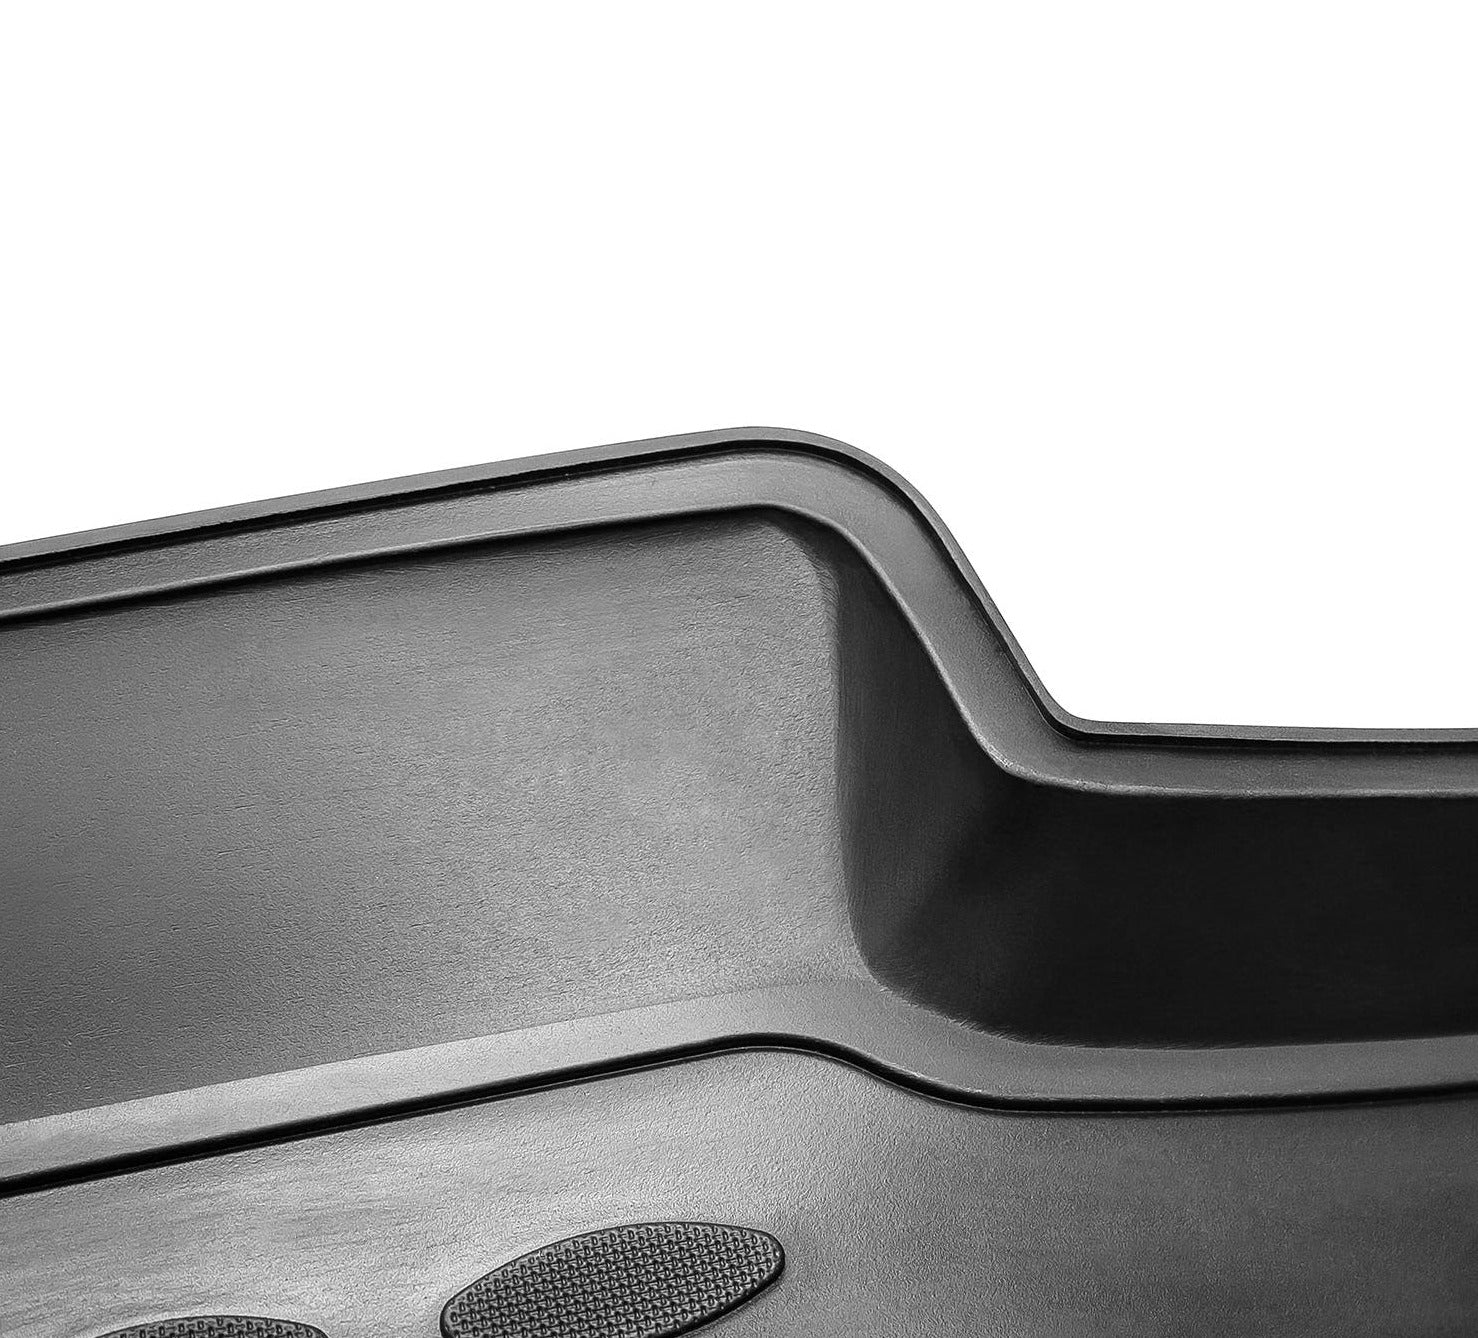 Westin Automotive 74-06-51039 Profile Floor Liners Front and 2nd Row Black